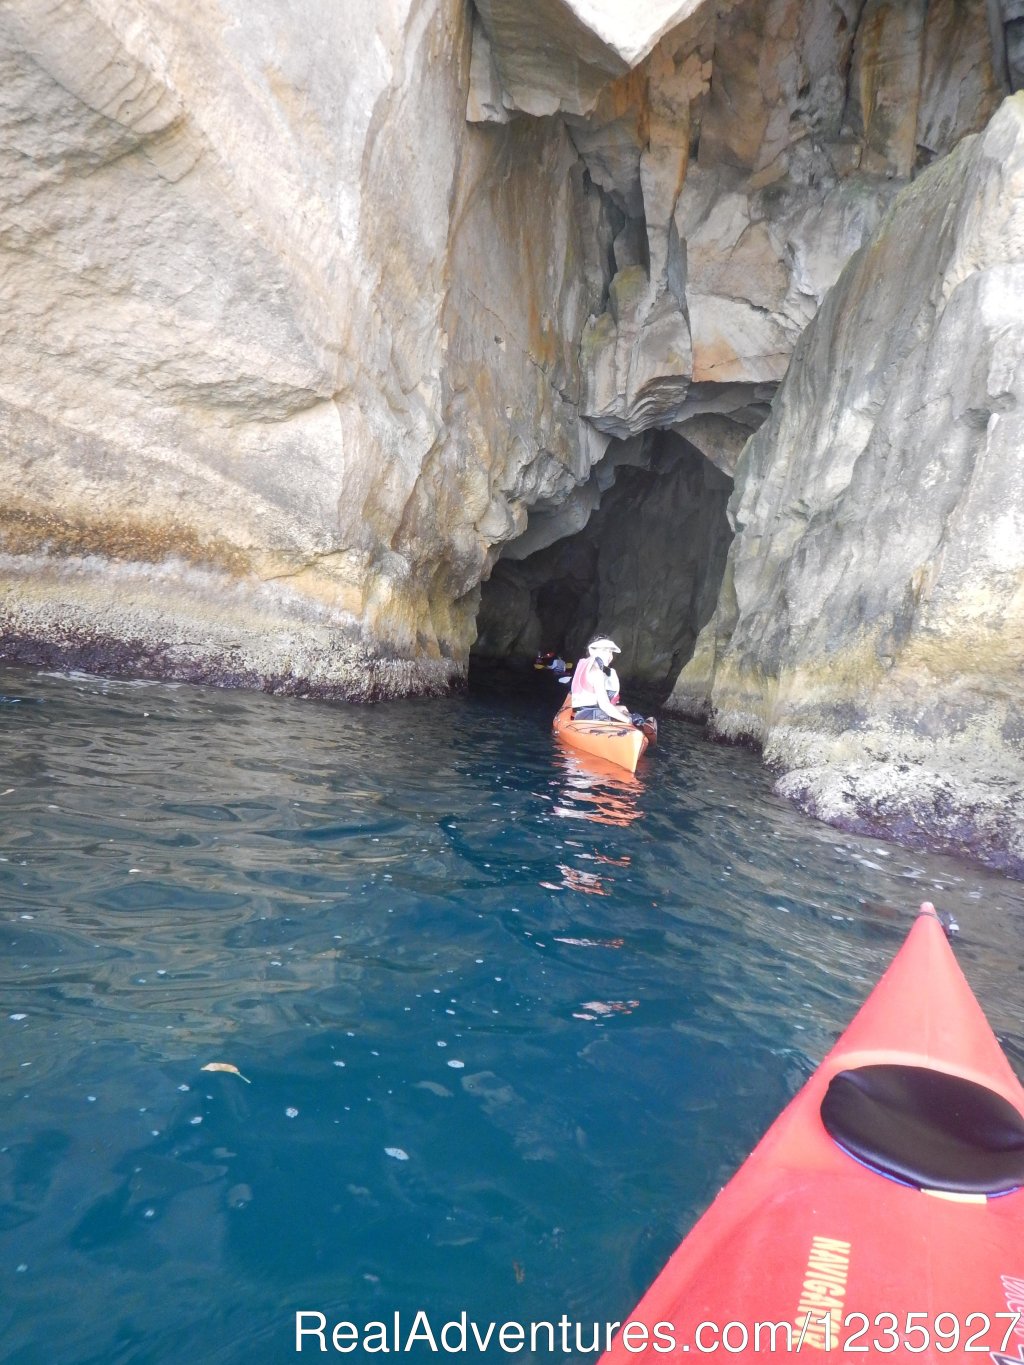 Adventure Kayaking - Active English Immersion | English Courses in your Teacher's Home by the Sea | Sliema, Malta | Language Schools | Image #1/23 | 